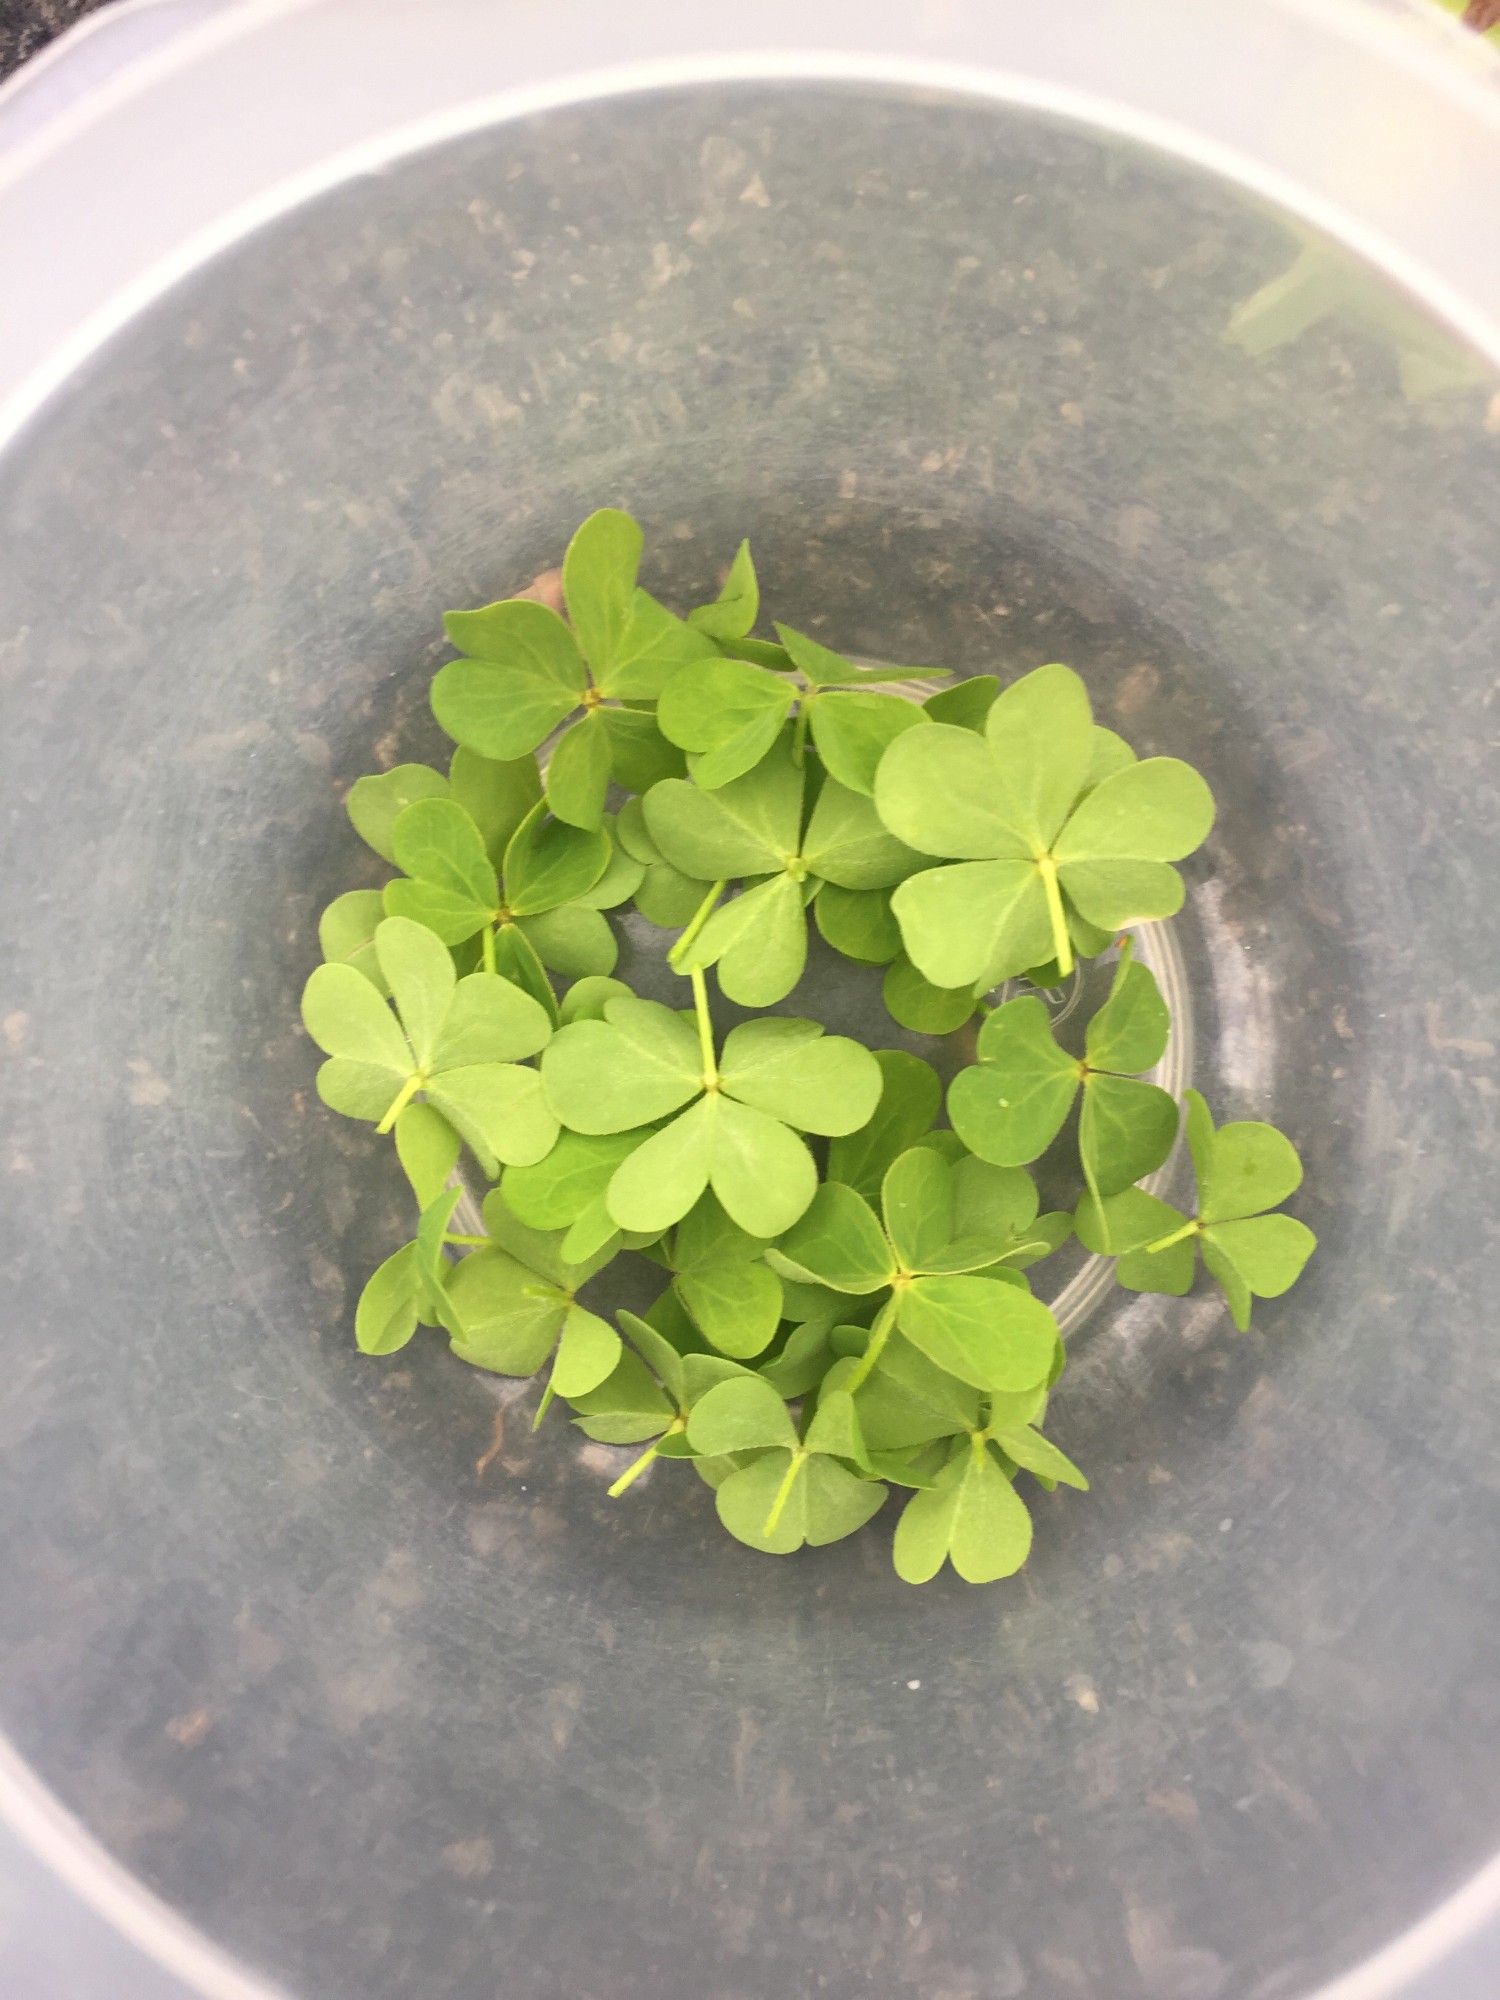 Wood Sorrel collected in a bowl